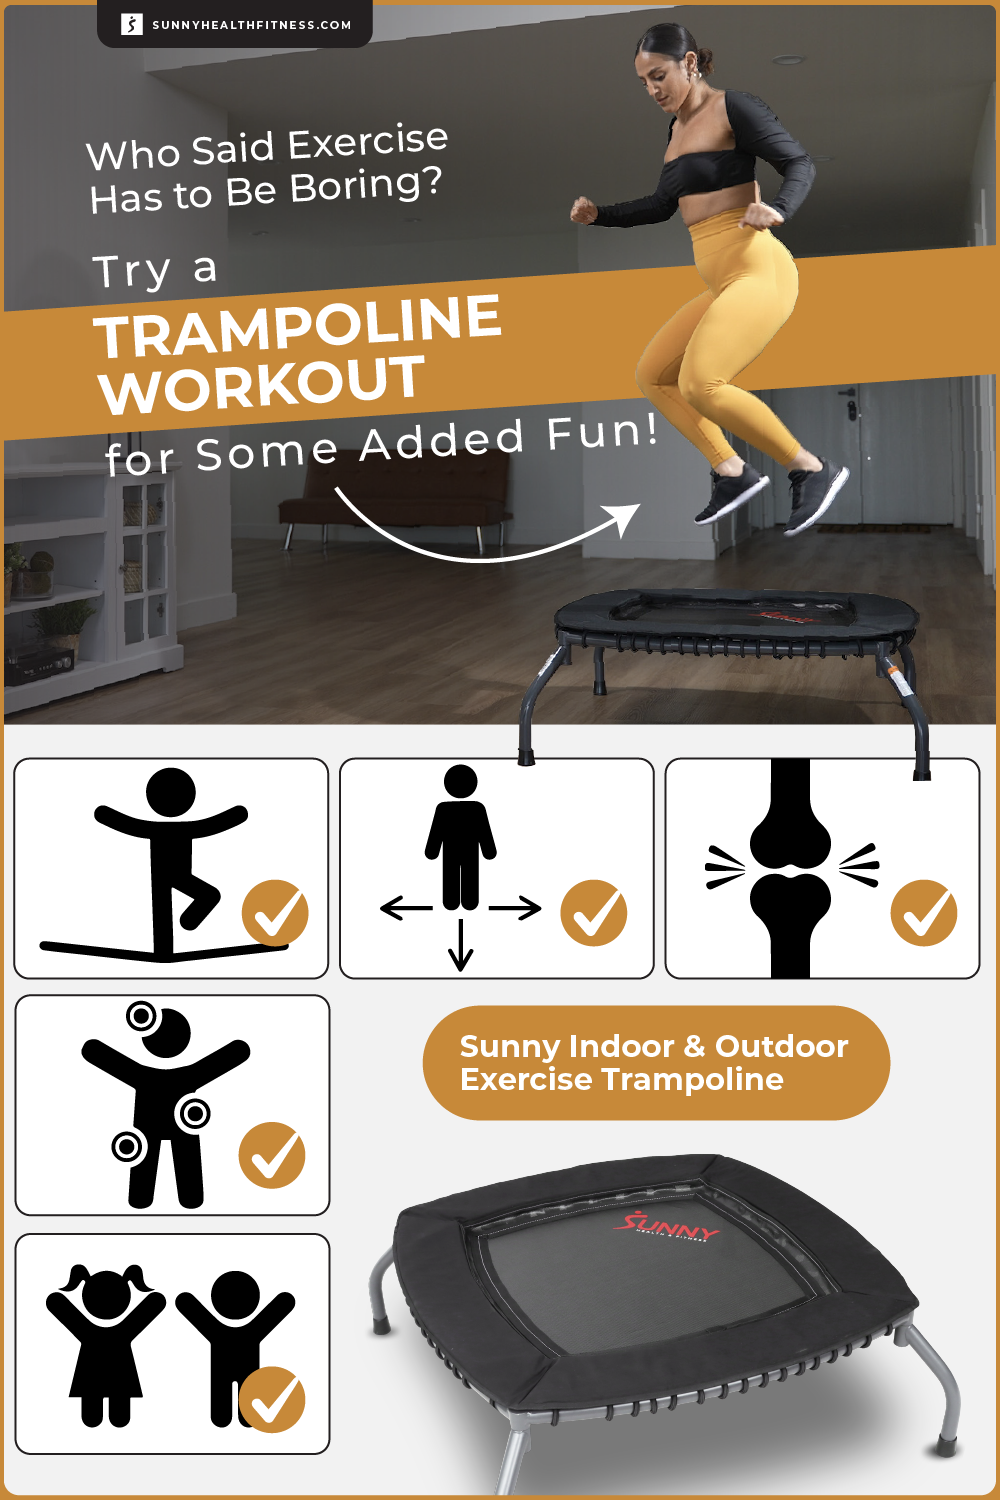 Trampoline Workout Infographic